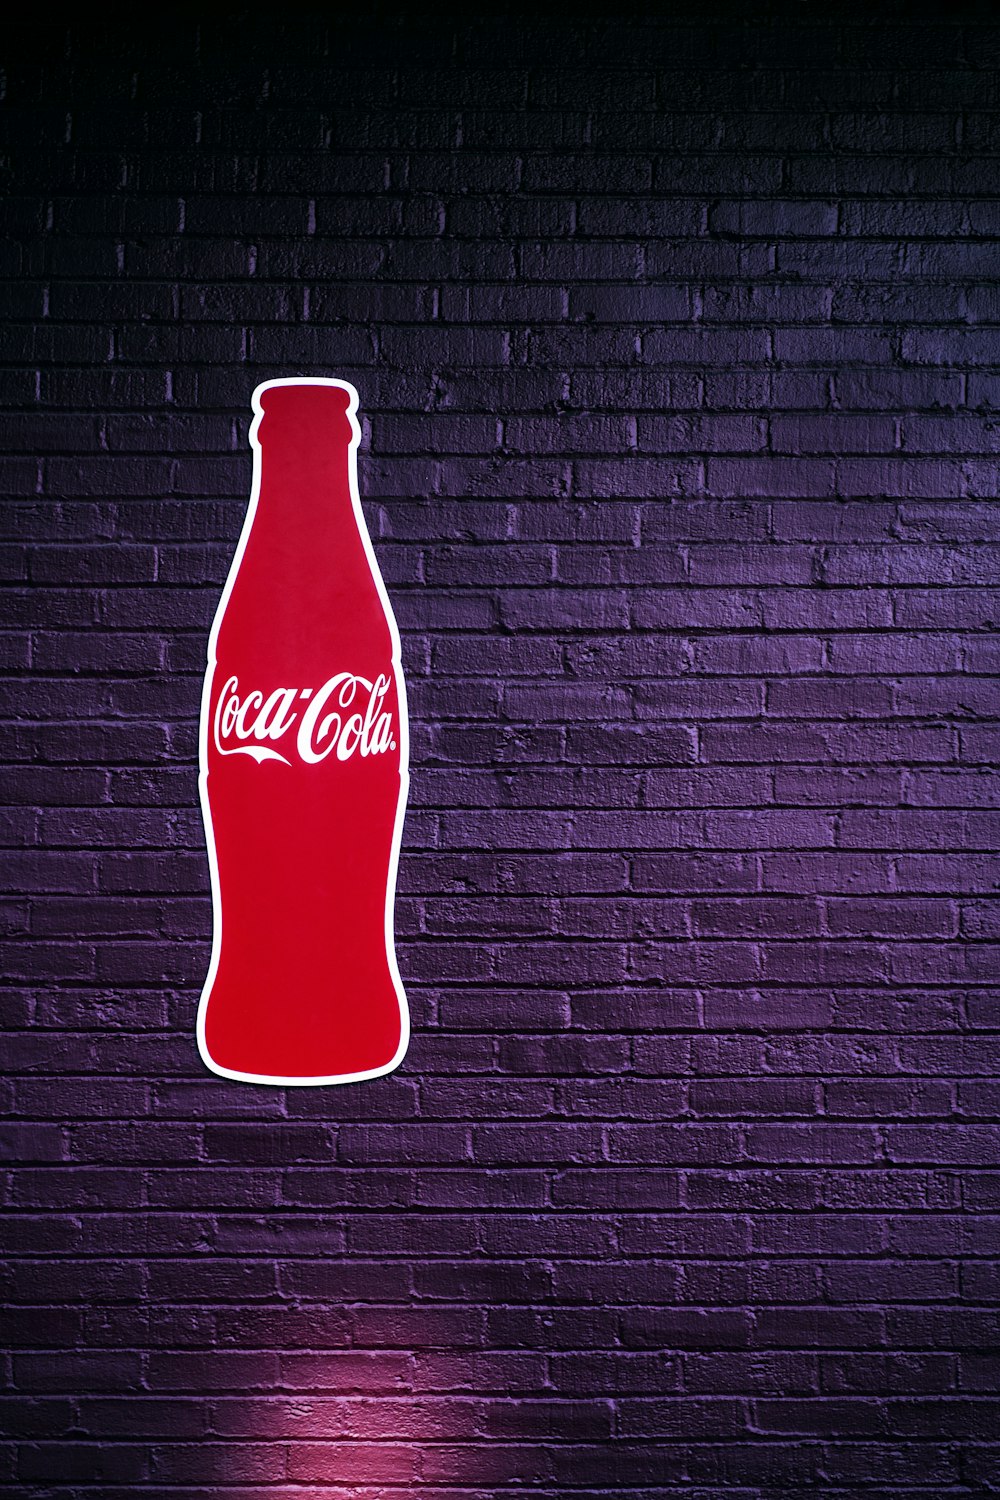 red coca cola bottle on black and white striped wall